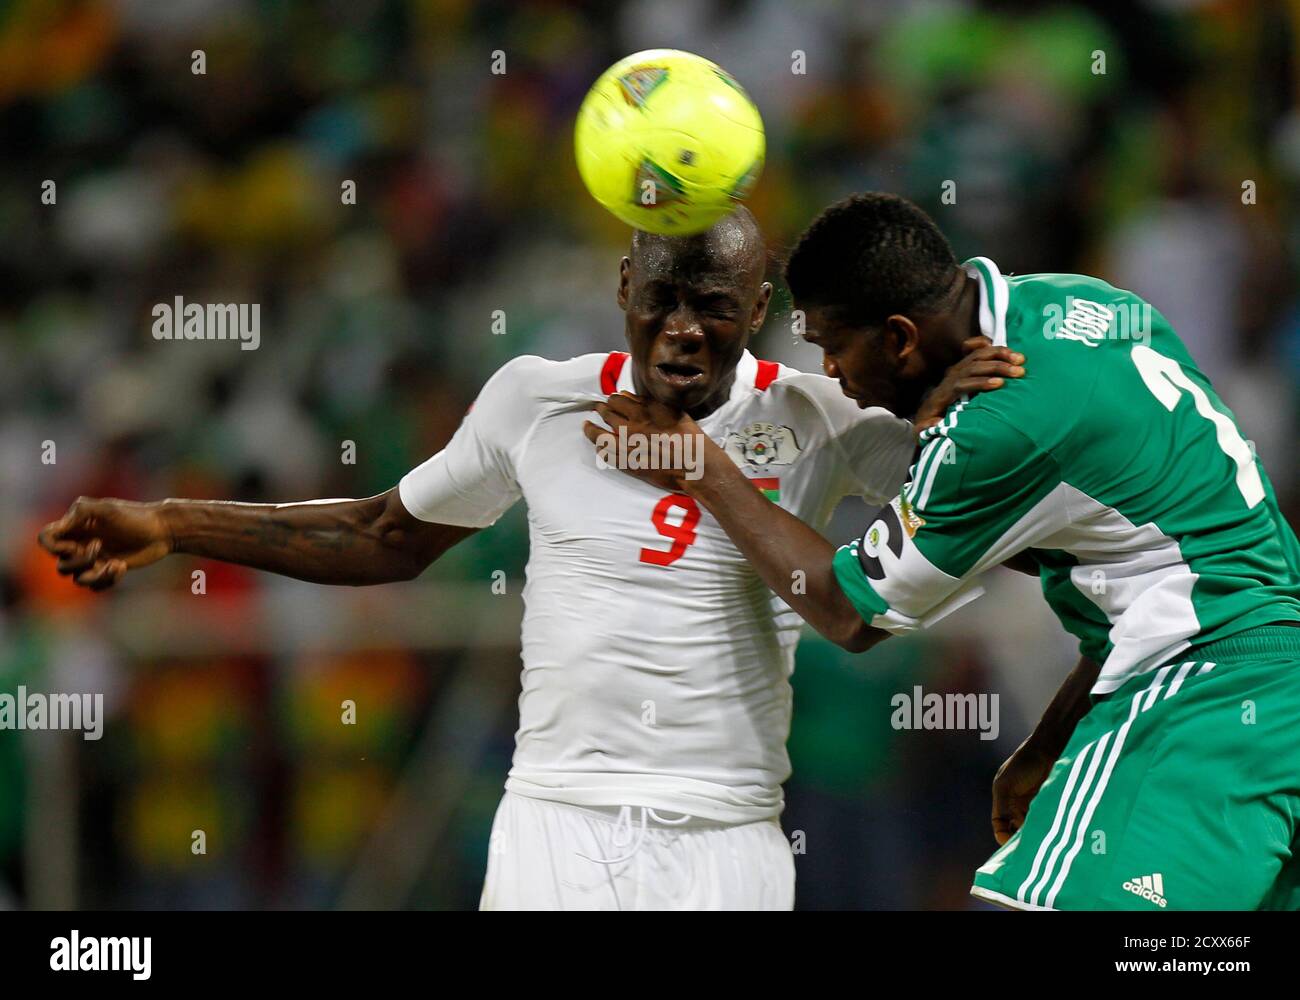 Burkina Faso's Moumouni Dagano (L) contests the ball with Nigeria's Joseph Yobo (R) during their African Nations Cup (AFCON 2013) Group C soccer match in Nelspruit, January 21, 2013. REUTERS/Thomas Mukoya (SOUTH AFRICA - Tags: SPORT SOCCER) Stock Photo